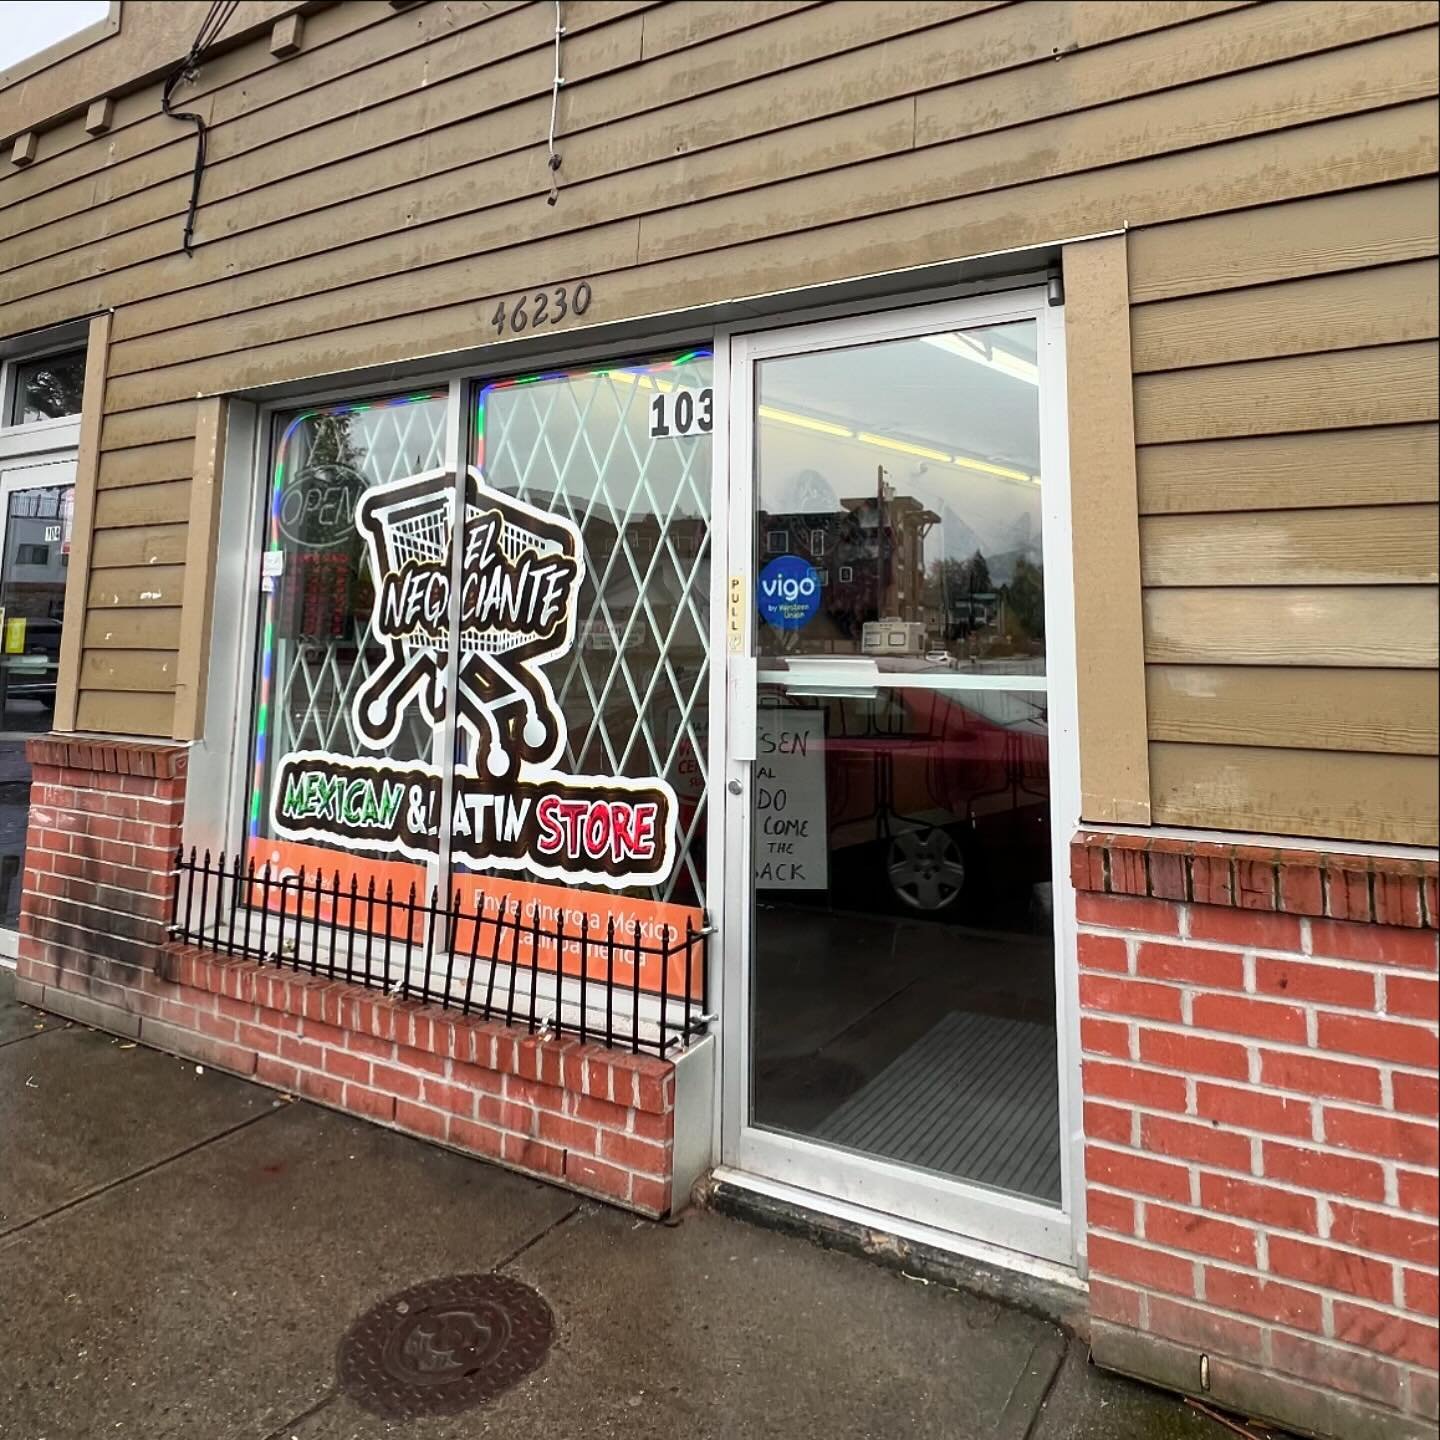 We love to pop into the Mexican &amp; Latin Store on Yale Road! This store has perfect pi&ntilde;atas, amazing tortillas, fresh cheese and spices plus so much more!
Be sure to give them a visit for your next authentic Mexican meal you plan on making.